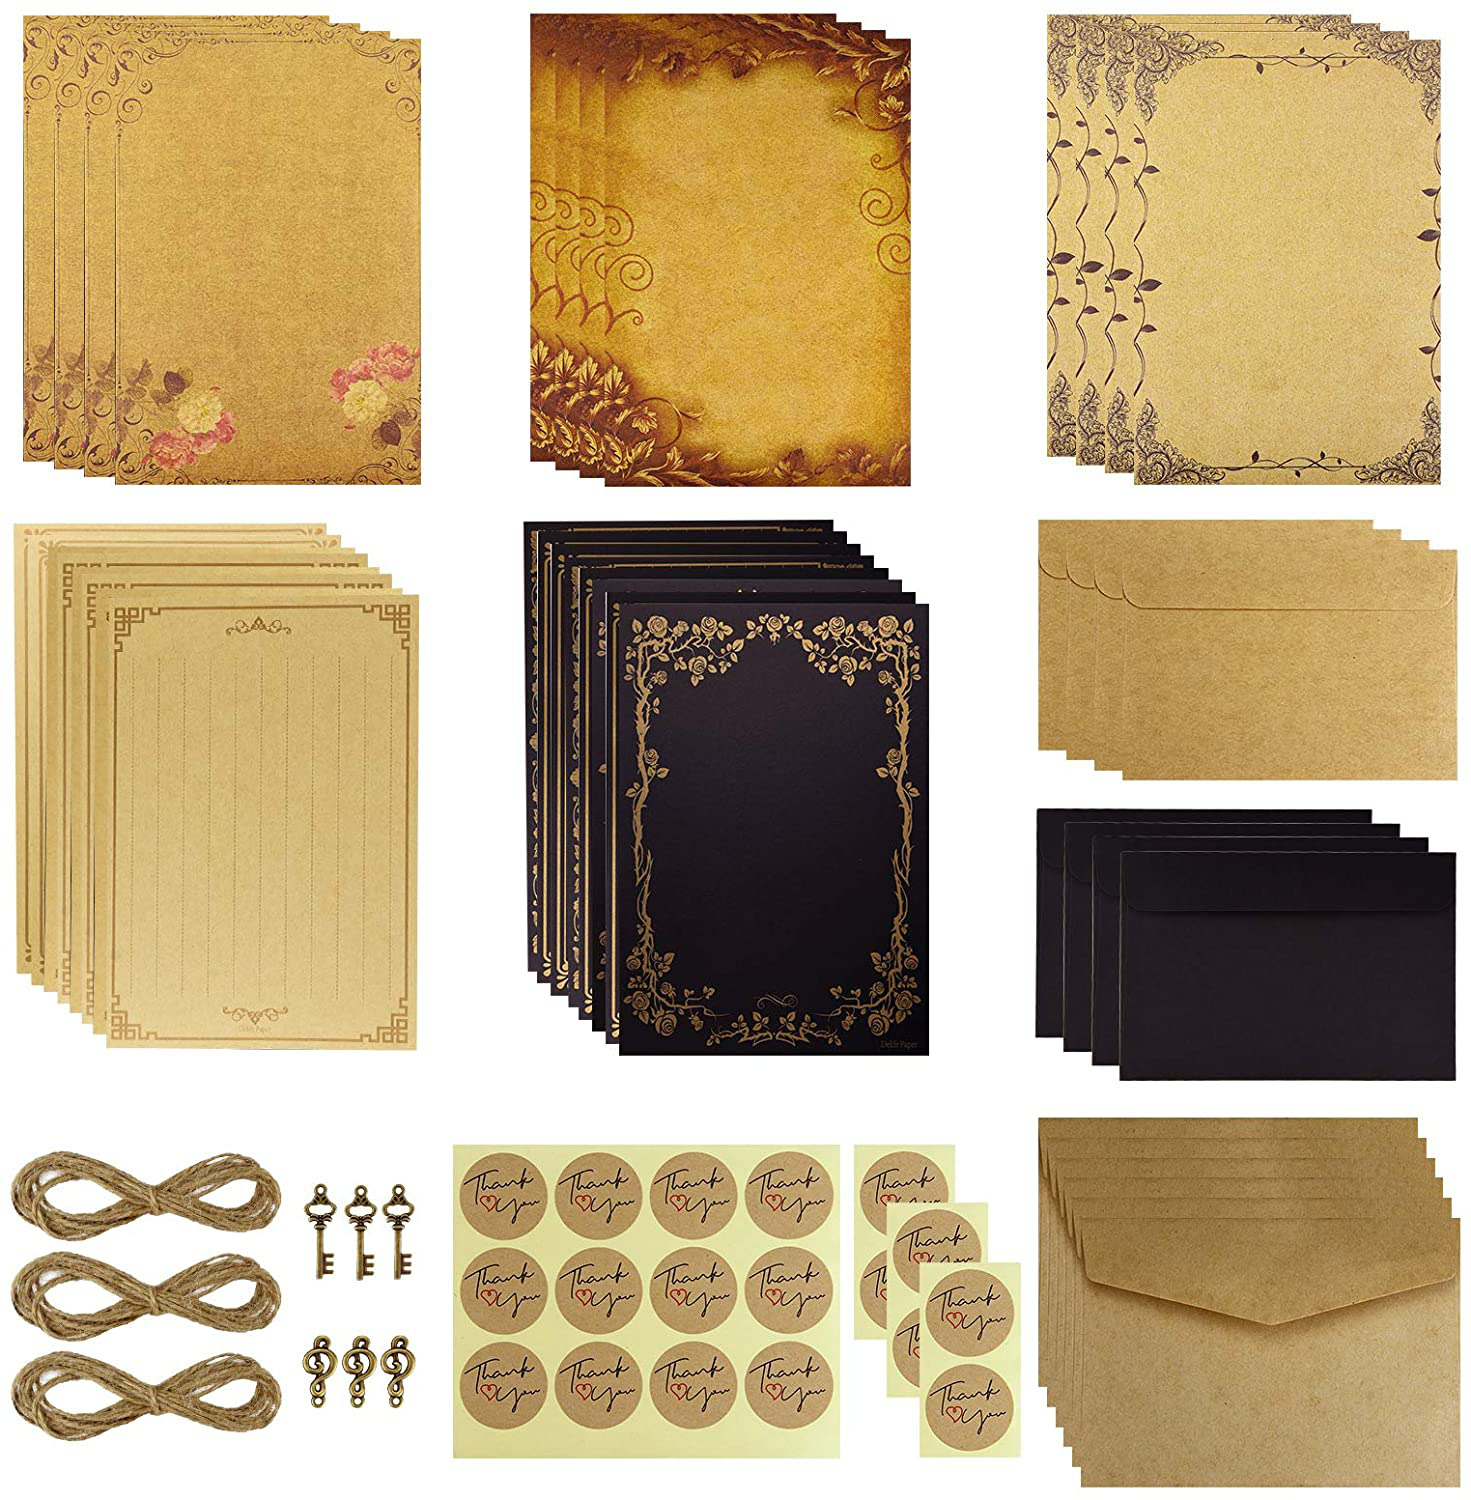 Dxhycc Vintage Stationary Paper and Envelopes Set, Aged Paper Writing Paper Stat